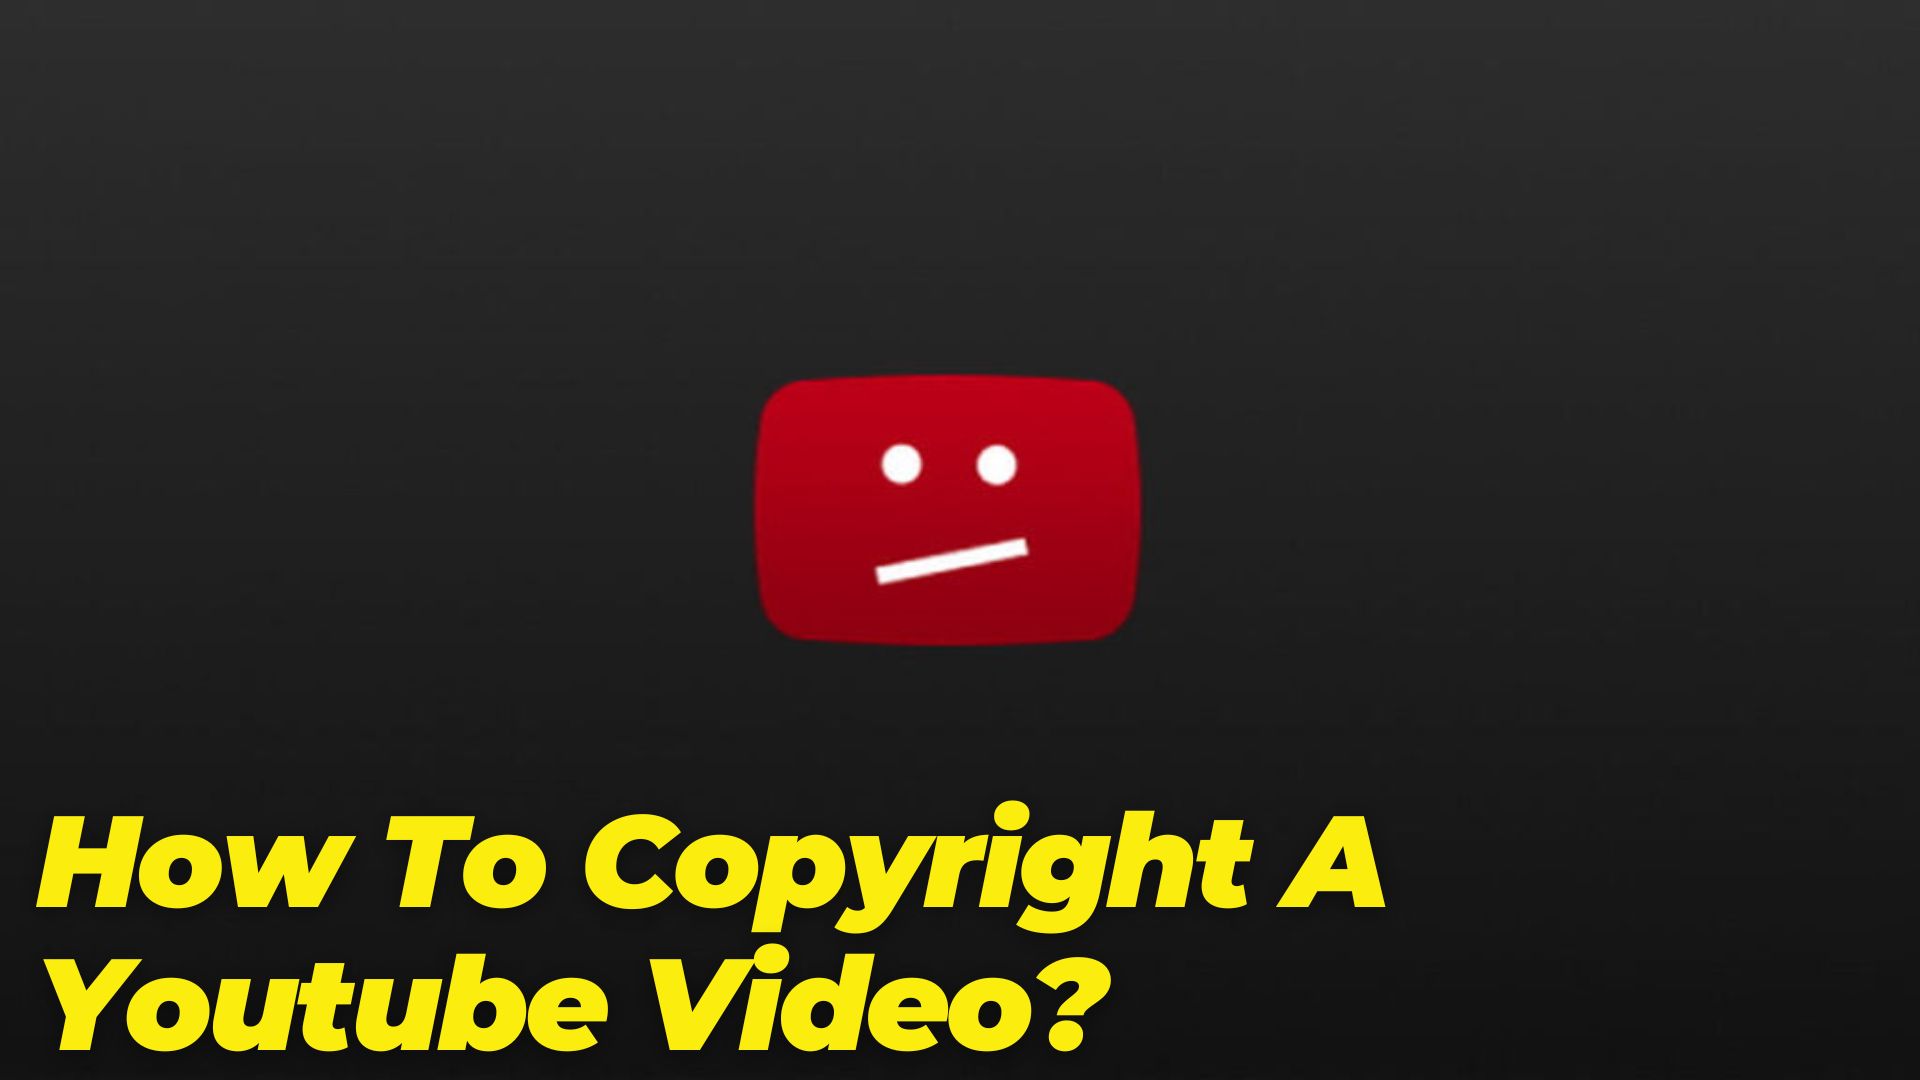 How To Copyright A Youtube Video?